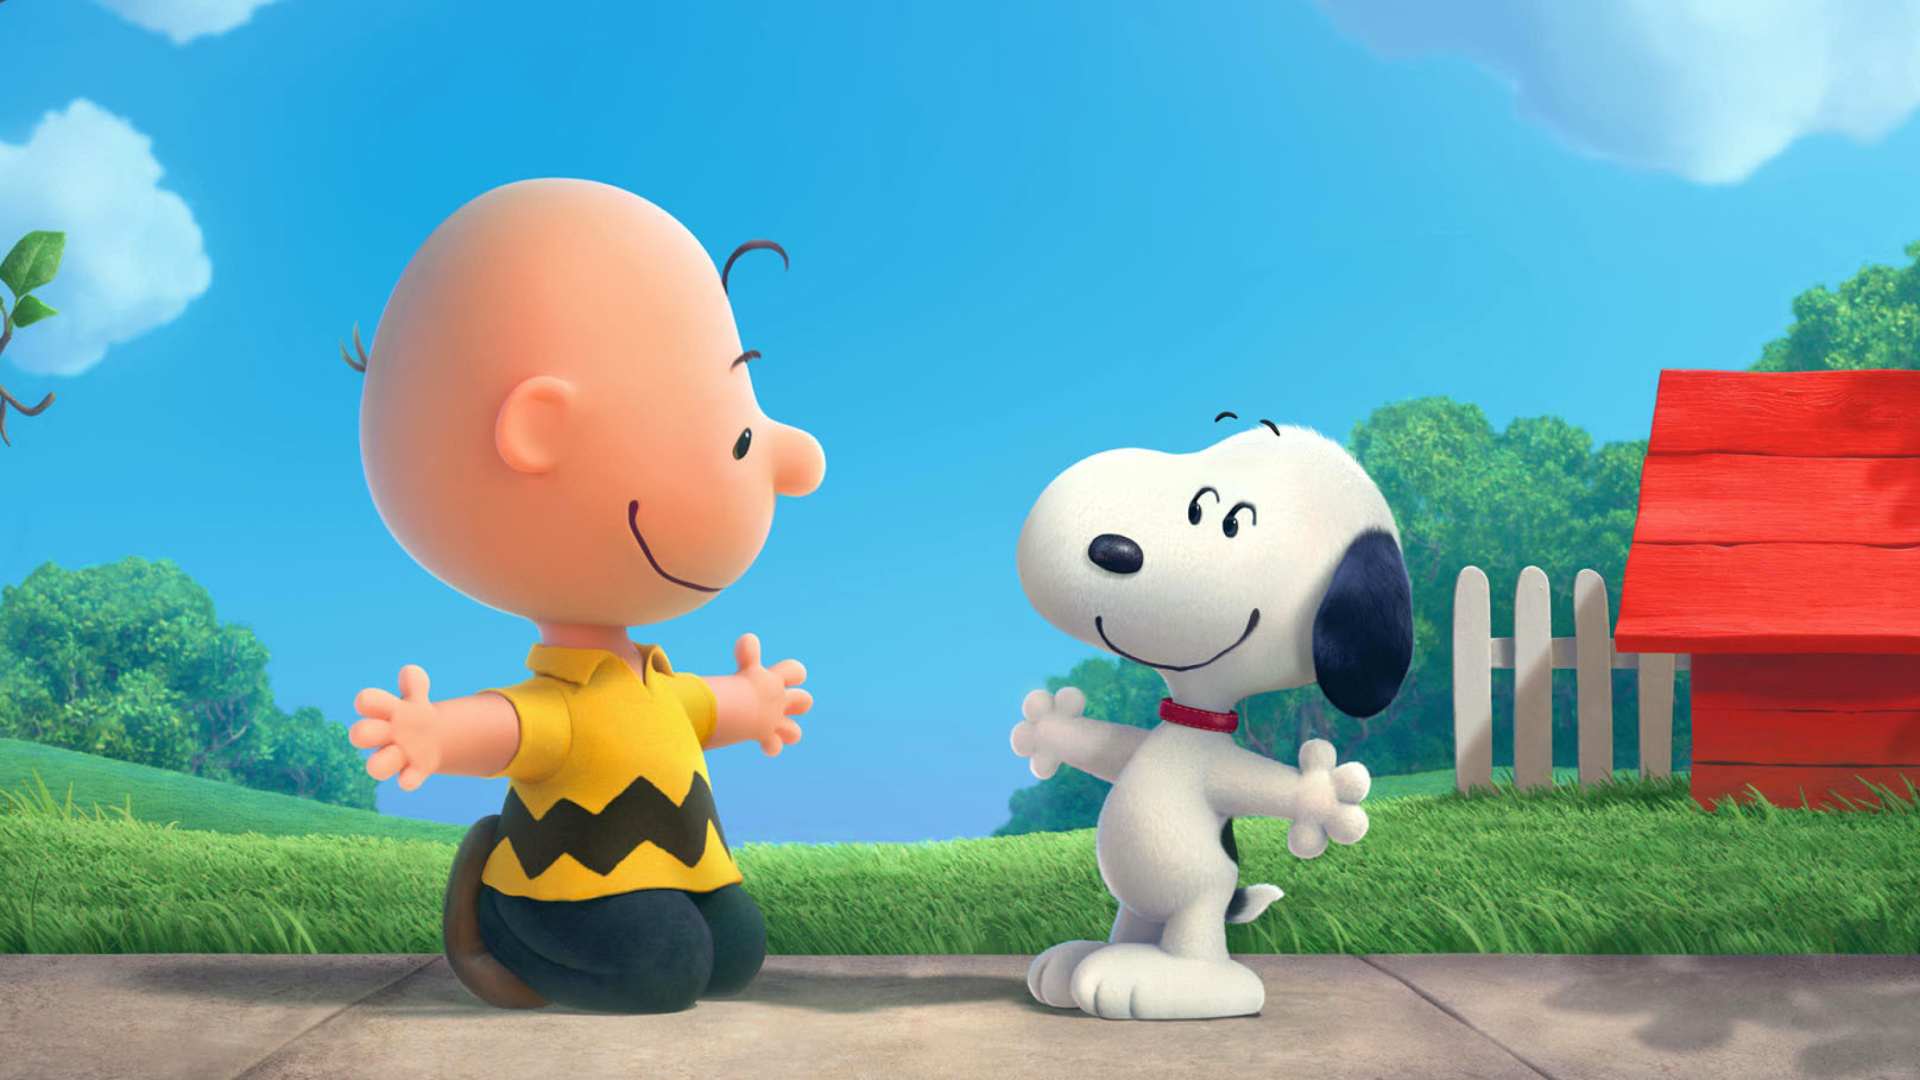 Sfondi The Peanuts Movie with Snoopy and Charlie Brown 1920x1080